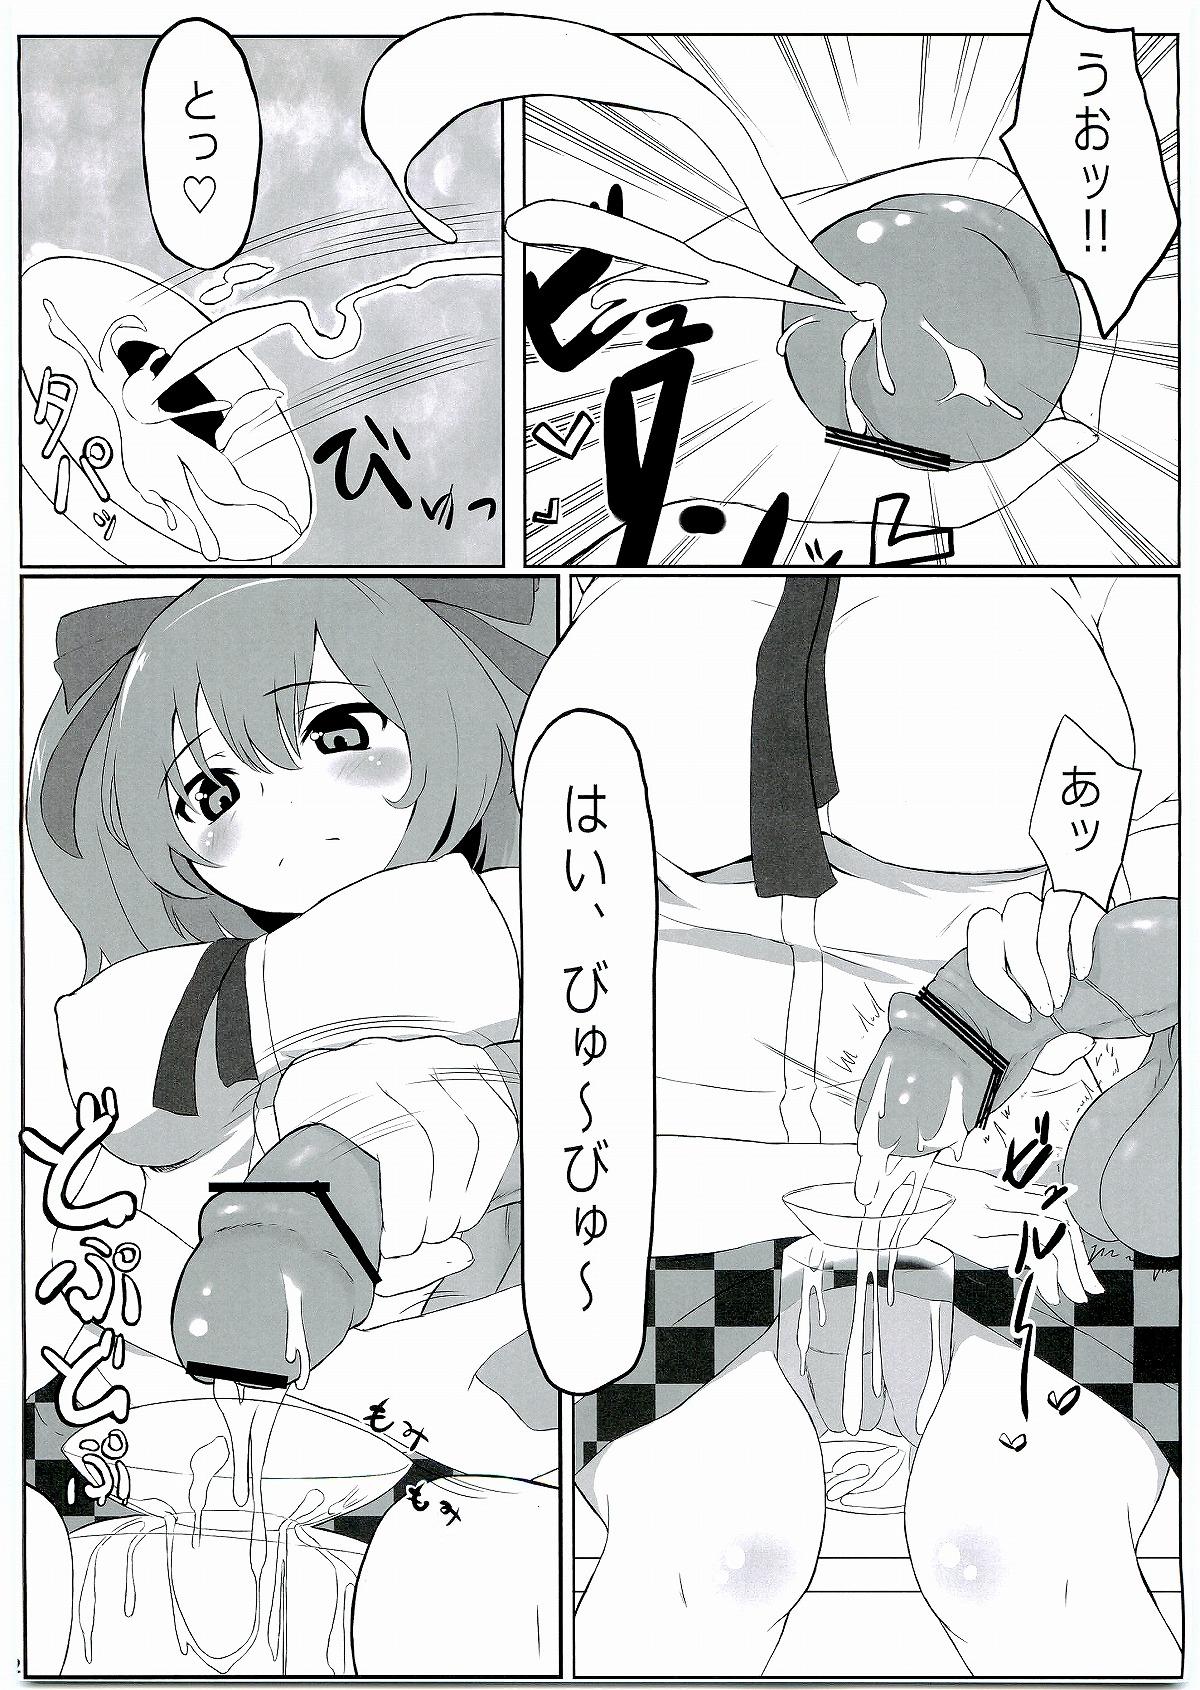 Hairypussy KKMK Vol. 2 - Touhou project Perfect Body - Page 3